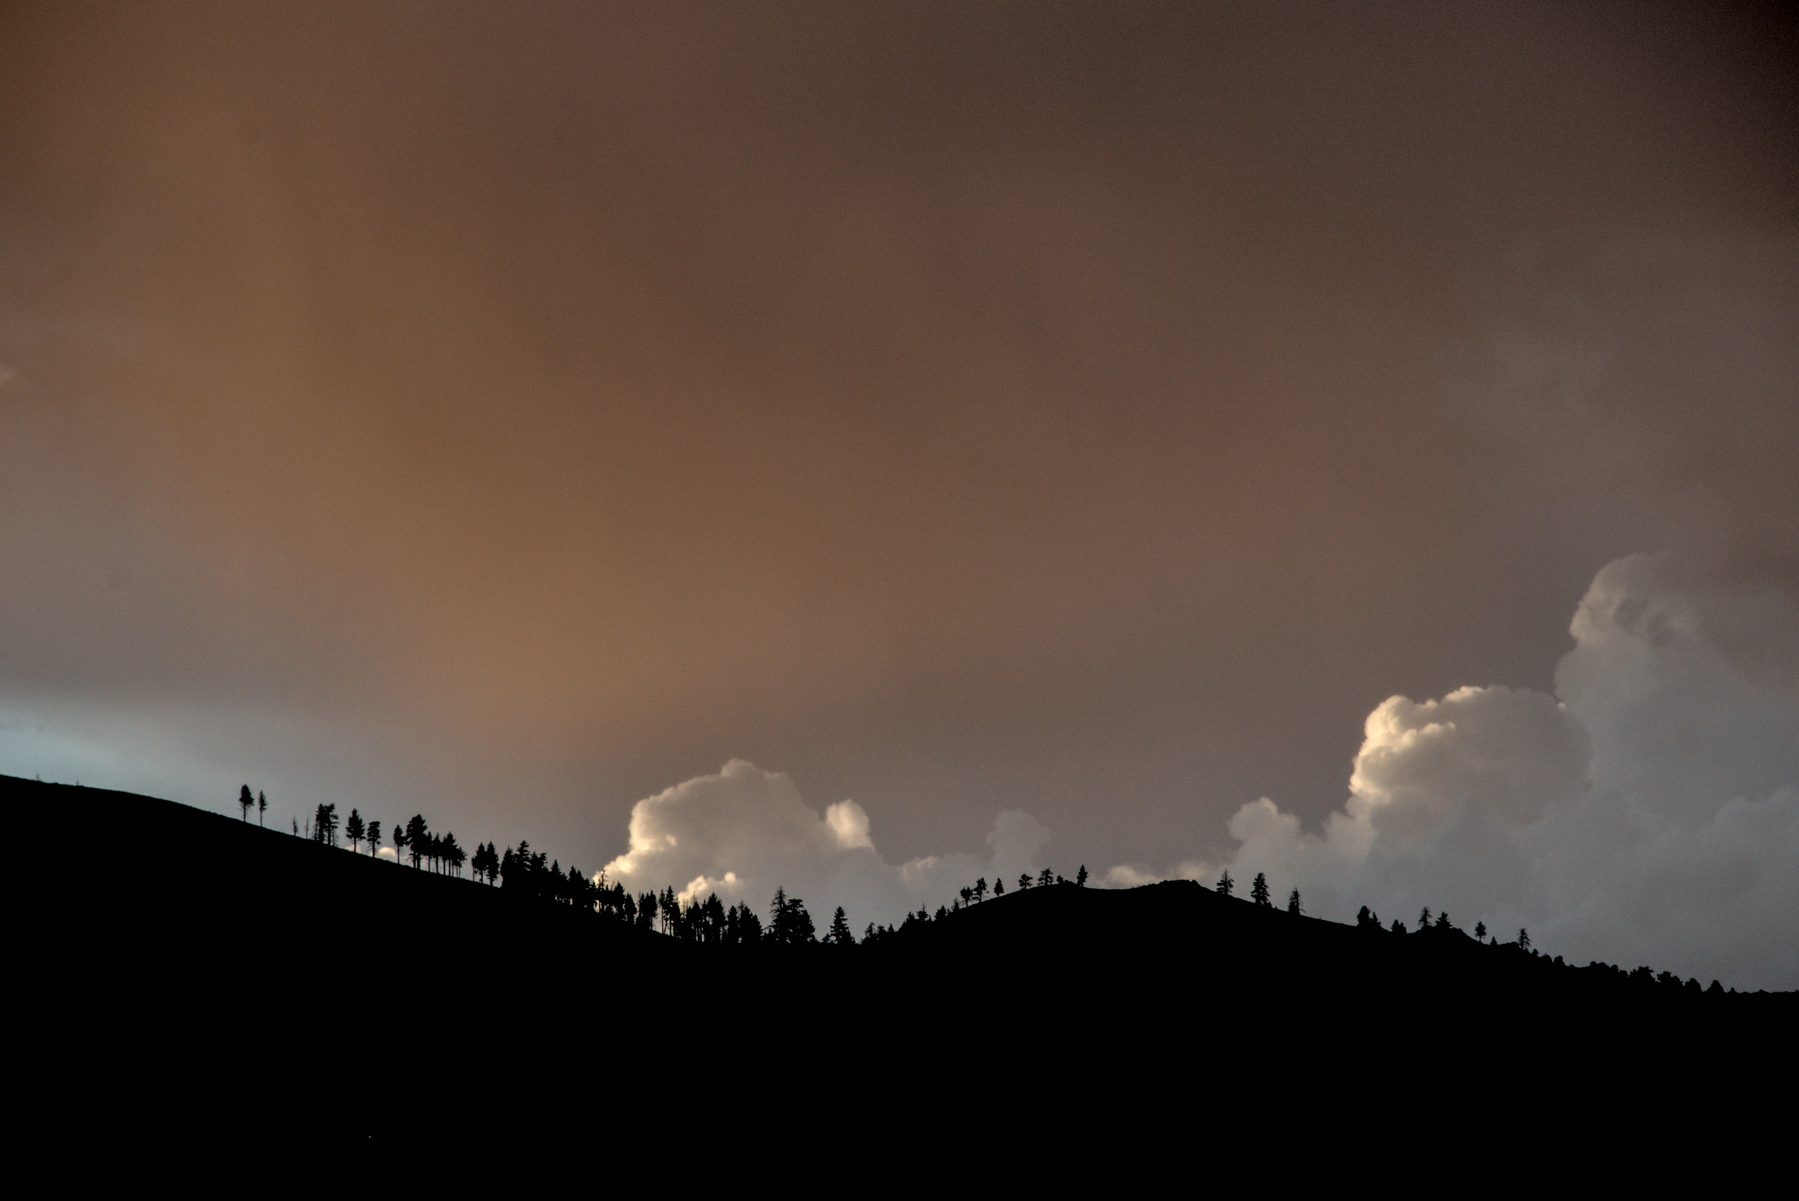 Blue sky and white puffy cloud are visible between cloud cover and a mountain ridge with pine trees in silhouette.